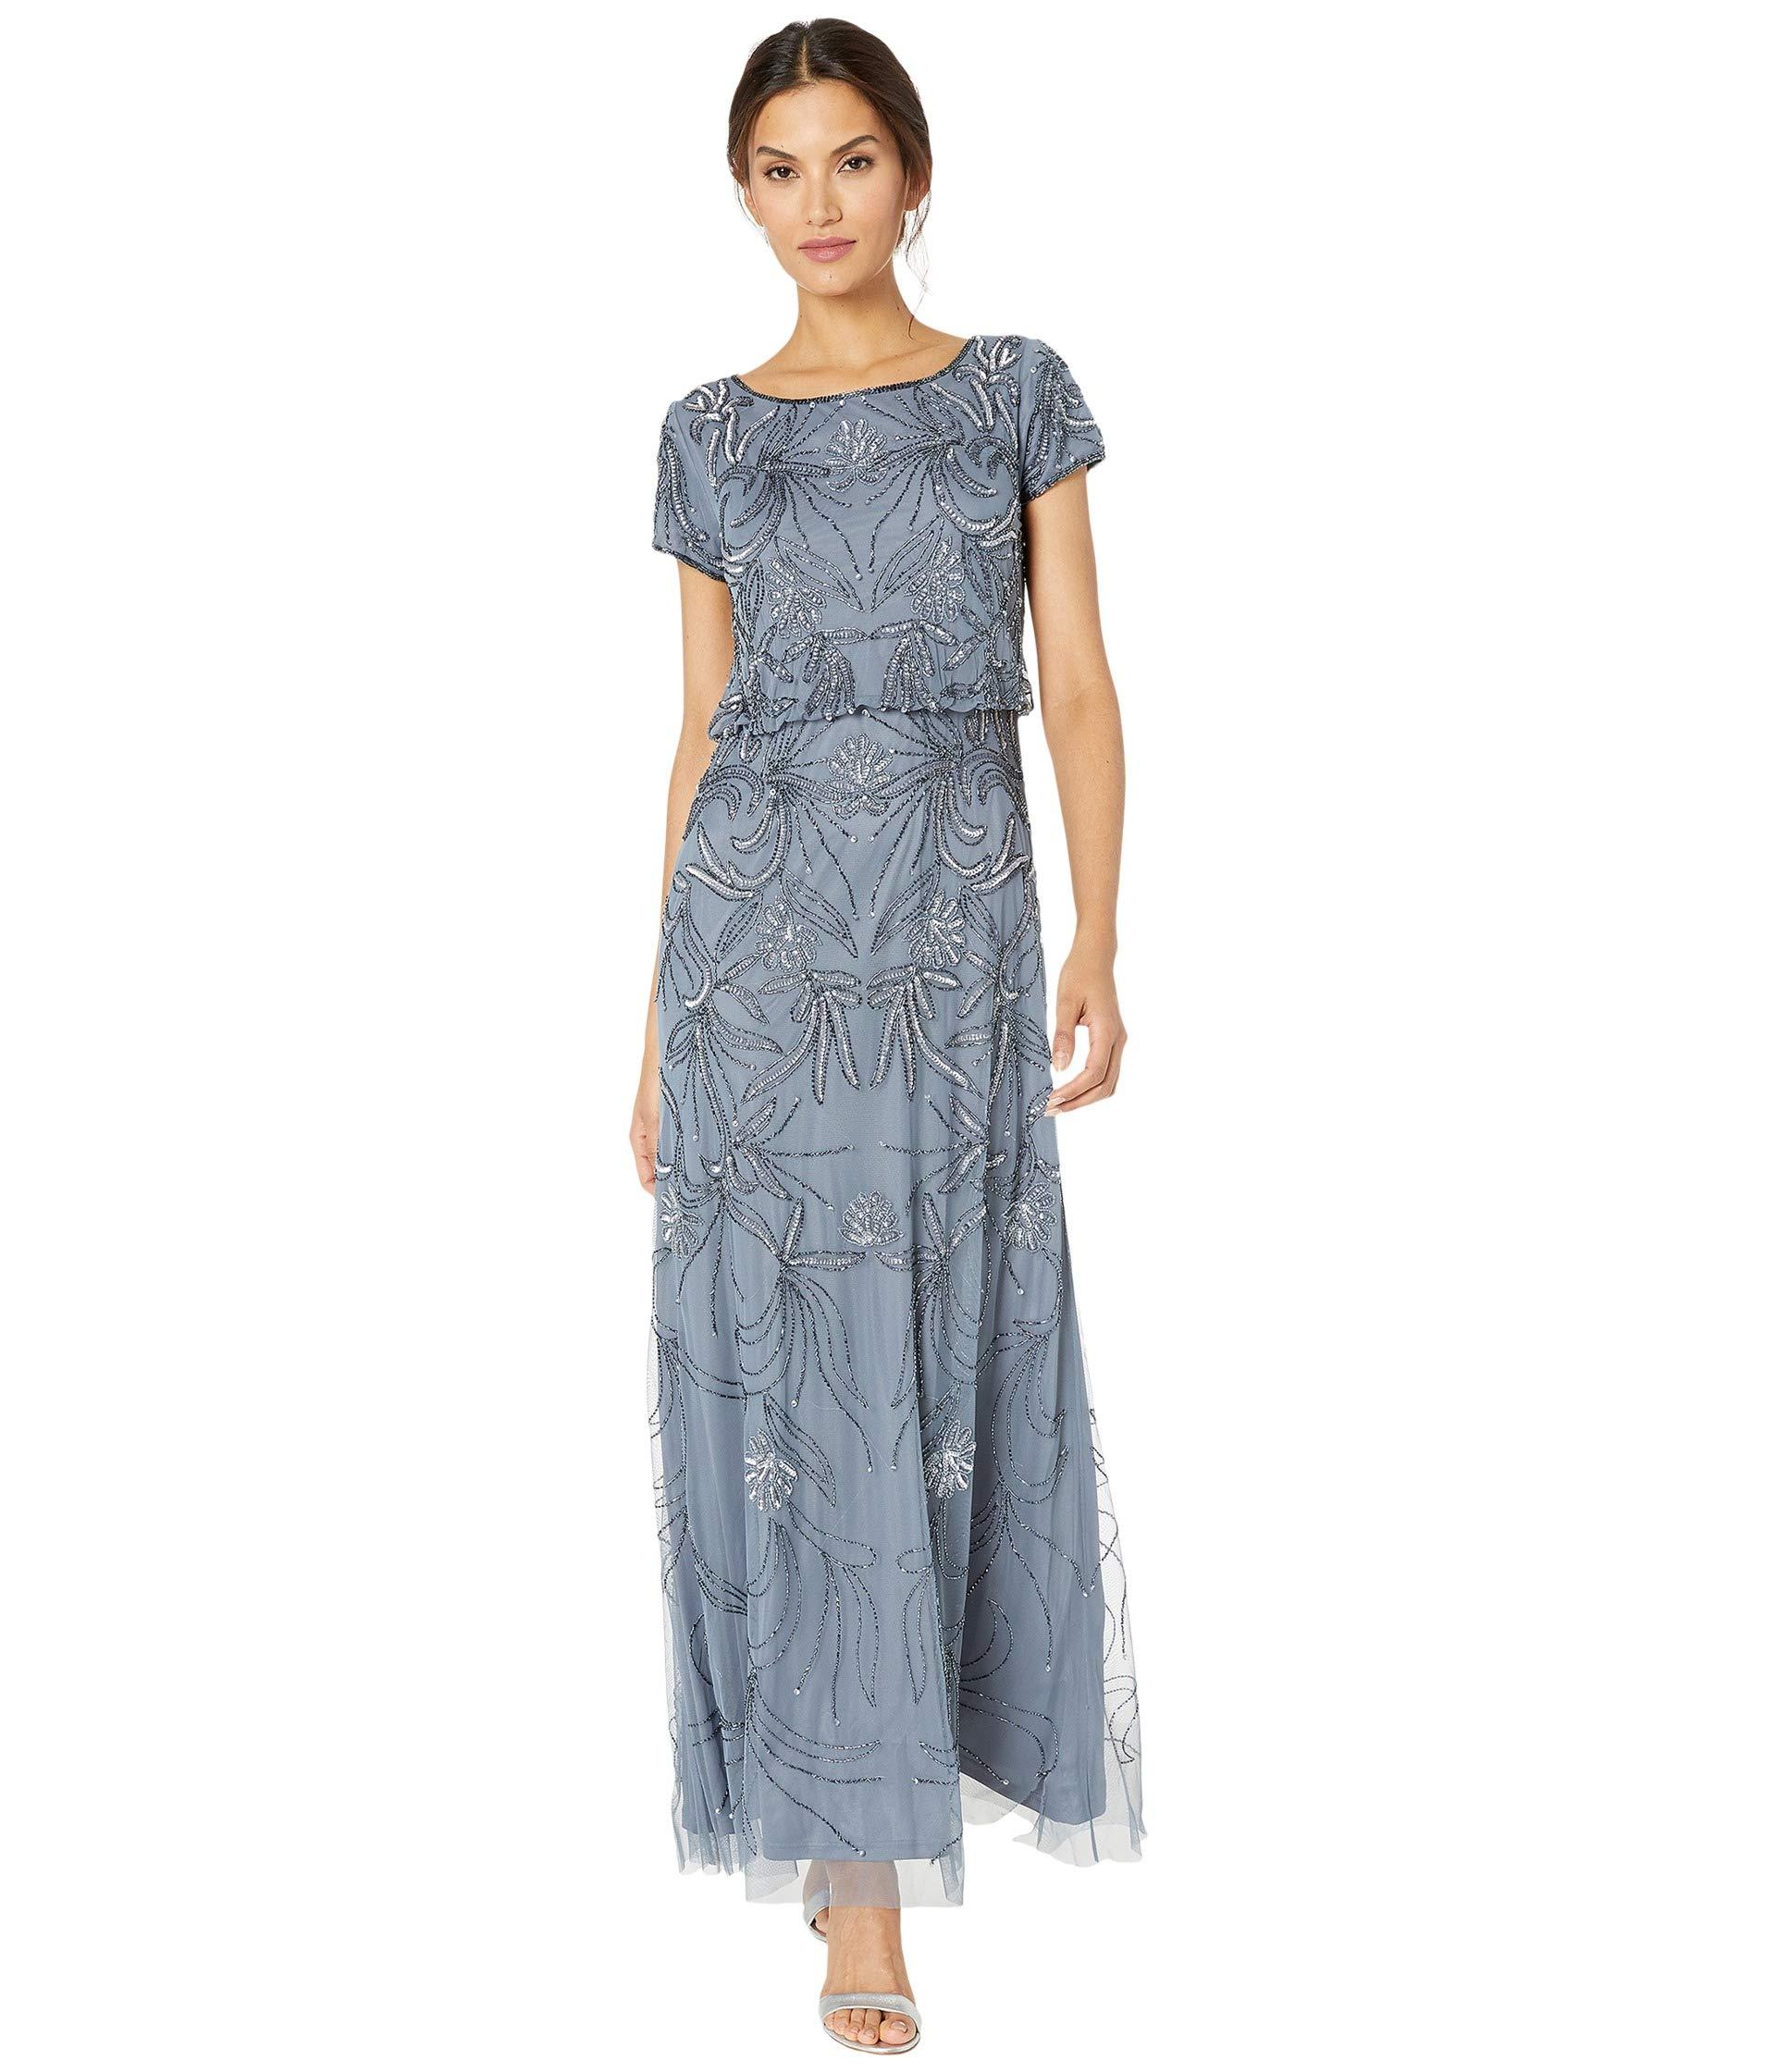 Adrianna Papell Synthetic Beaded Blouson Evening Gown in Dusty Blue